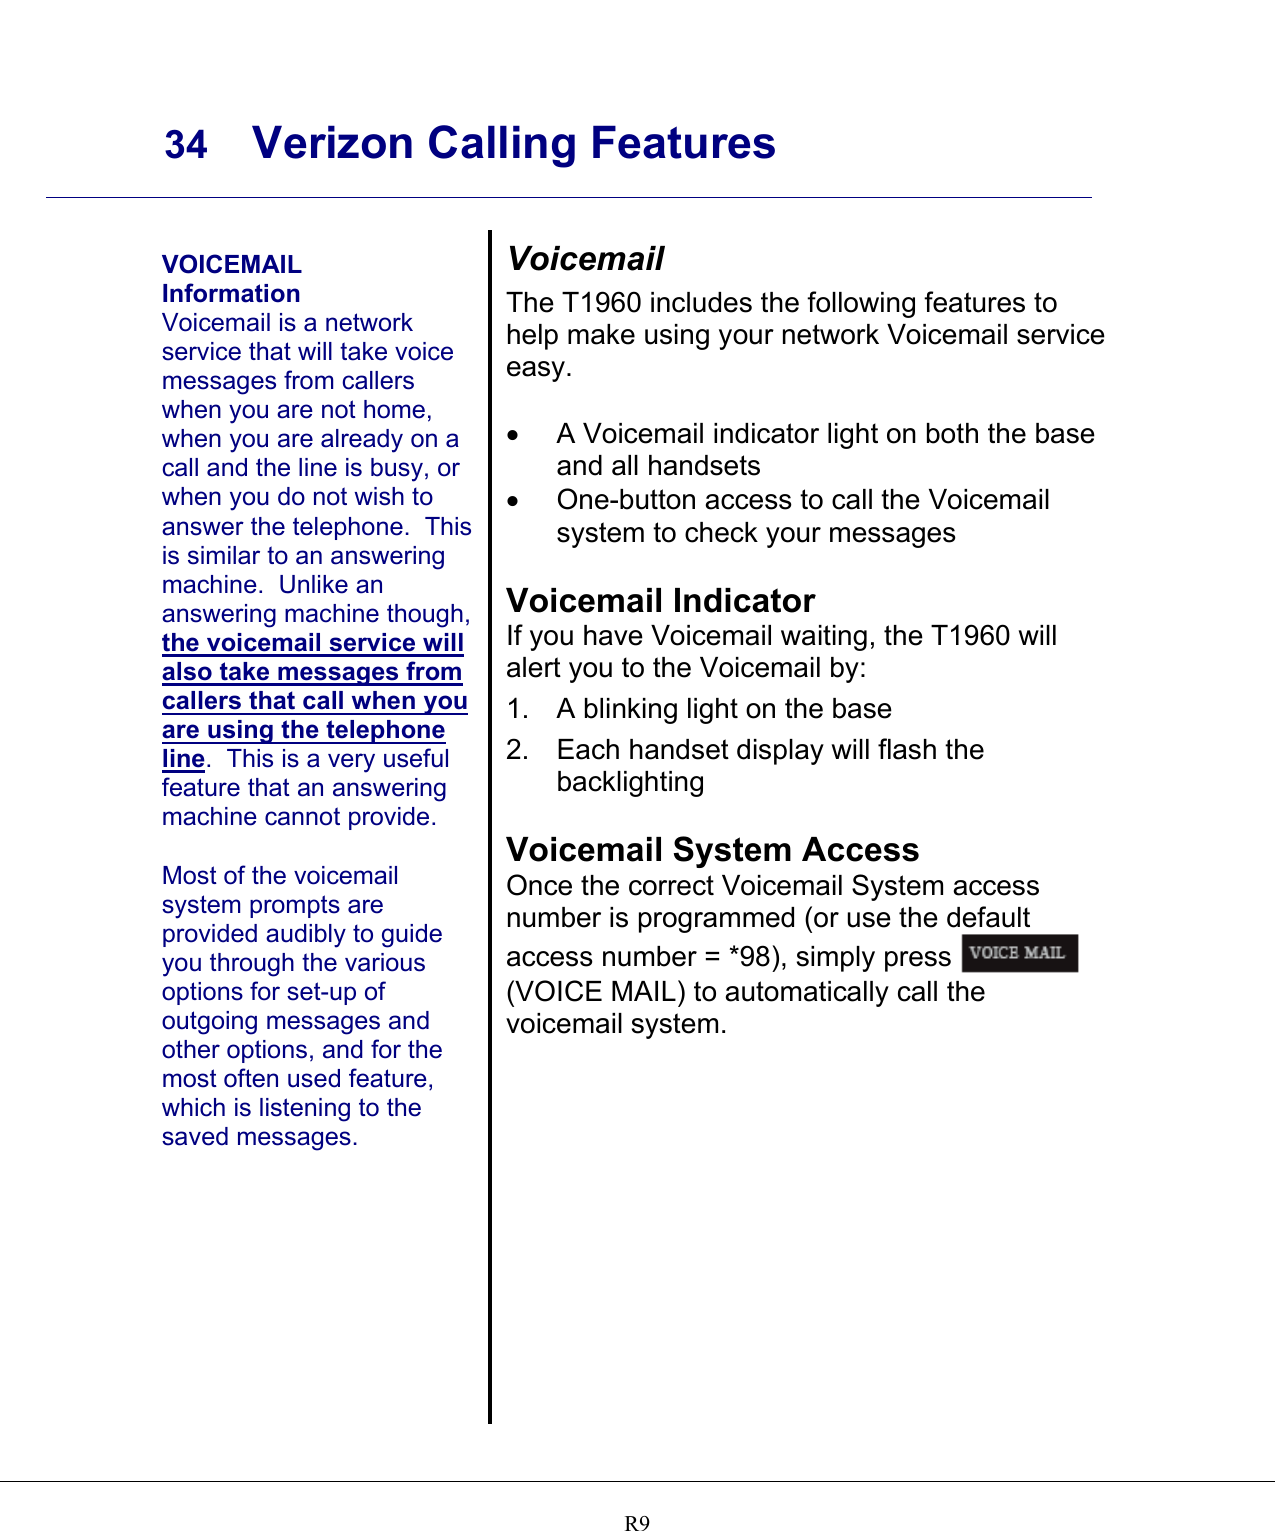     34 Verizon Calling Features    R9  VOICEMAIL Information Voicemail is a network service that will take voice messages from callers when you are not home, when you are already on a call and the line is busy, or when you do not wish to answer the telephone.  This is similar to an answering machine.  Unlike an answering machine though, the voicemail service will also take messages from callers that call when you are using the telephone line.  This is a very useful feature that an answering machine cannot provide.  Most of the voicemail system prompts are provided audibly to guide you through the various options for set-up of outgoing messages and other options, and for the most often used feature, which is listening to the saved messages.   Voicemail The T1960 includes the following features to help make using your network Voicemail service easy.  •  A Voicemail indicator light on both the base and all handsets •  One-button access to call the Voicemail system to check your messages  Voicemail Indicator If you have Voicemail waiting, the T1960 will alert you to the Voicemail by: 1.  A blinking light on the base 2.  Each handset display will flash the backlighting  Voicemail System Access Once the correct Voicemail System access number is programmed (or use the default access number = *98), simply press   (VOICE MAIL) to automatically call the voicemail system.   